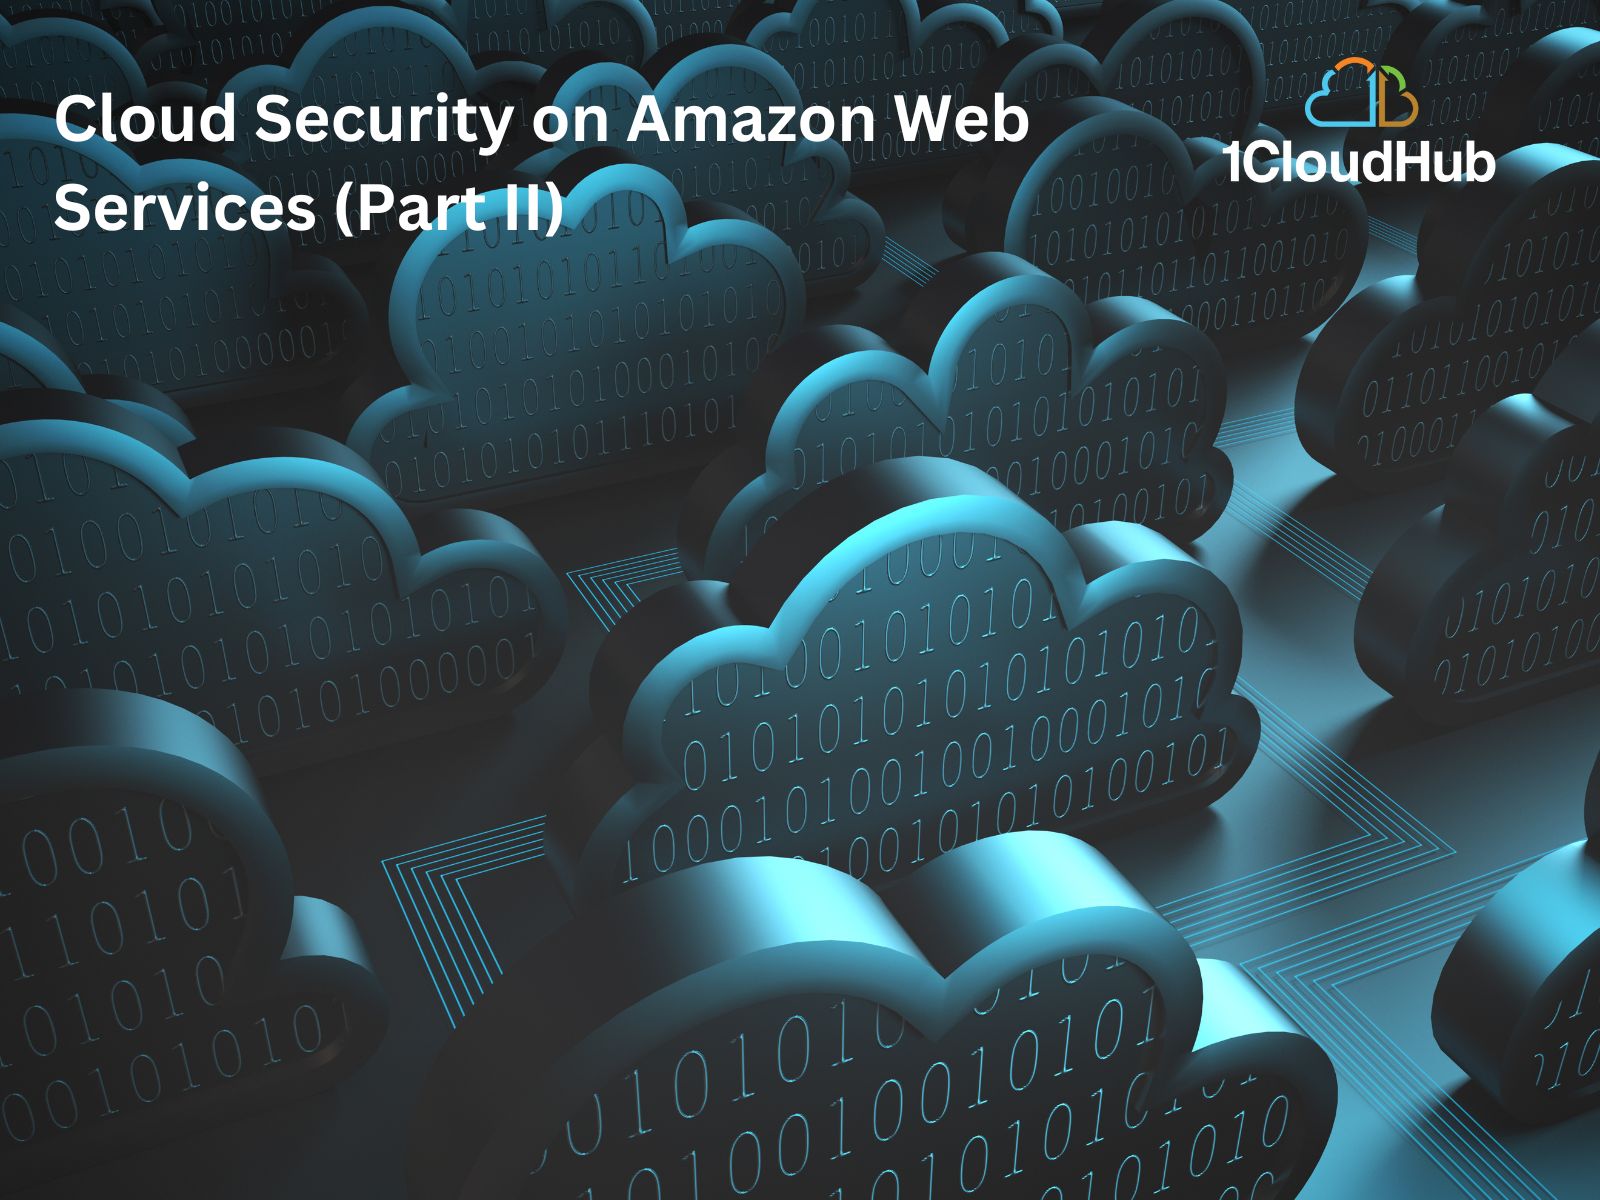 Cloud Security on Amazon Web Services (Part II)